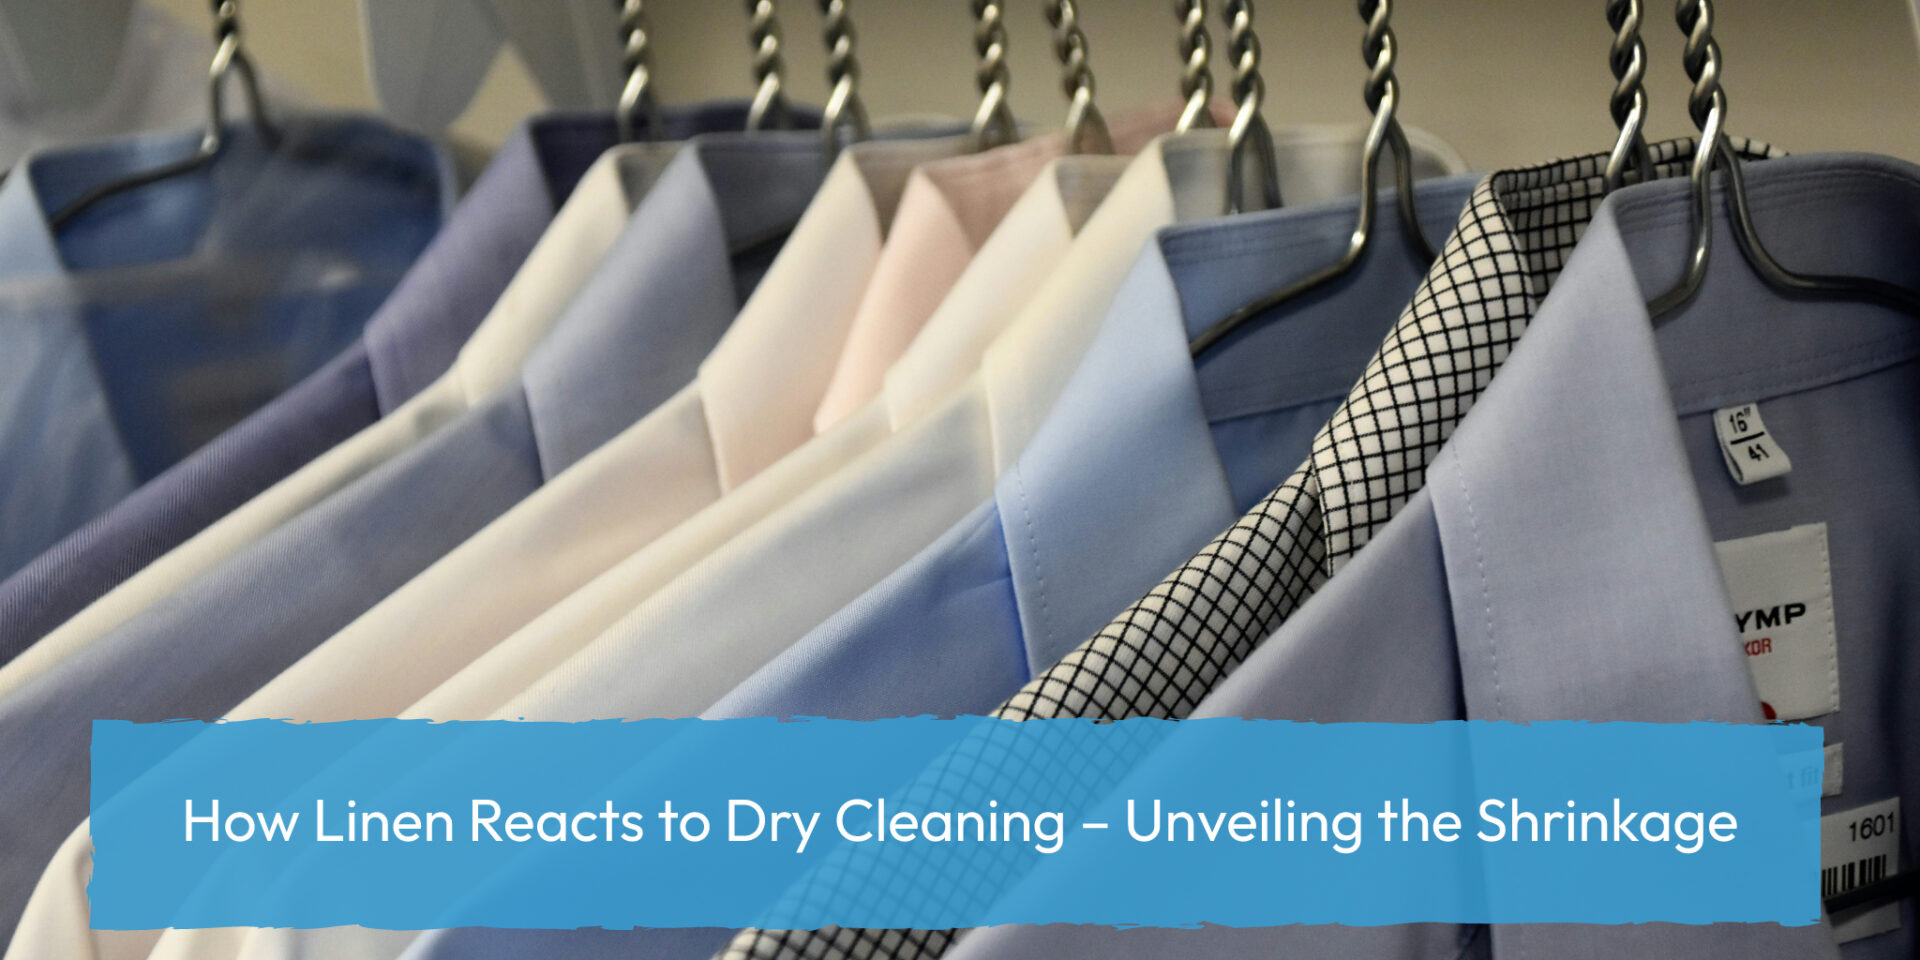 How Linen Reacts to Dry Cleaning